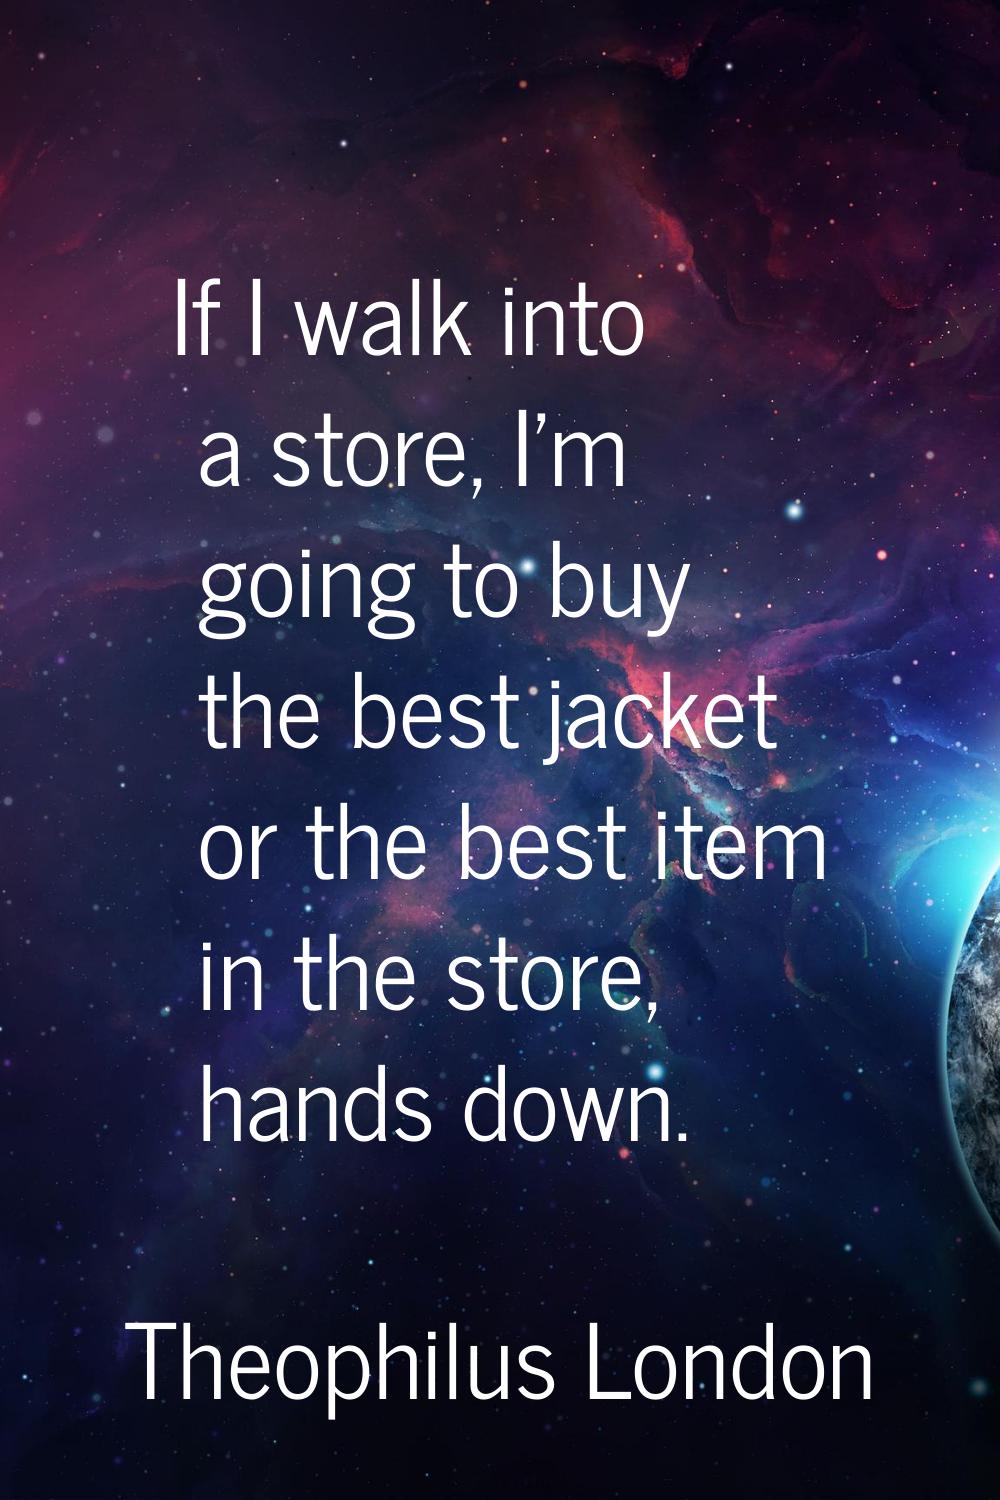 If I walk into a store, I'm going to buy the best jacket or the best item in the store, hands down.